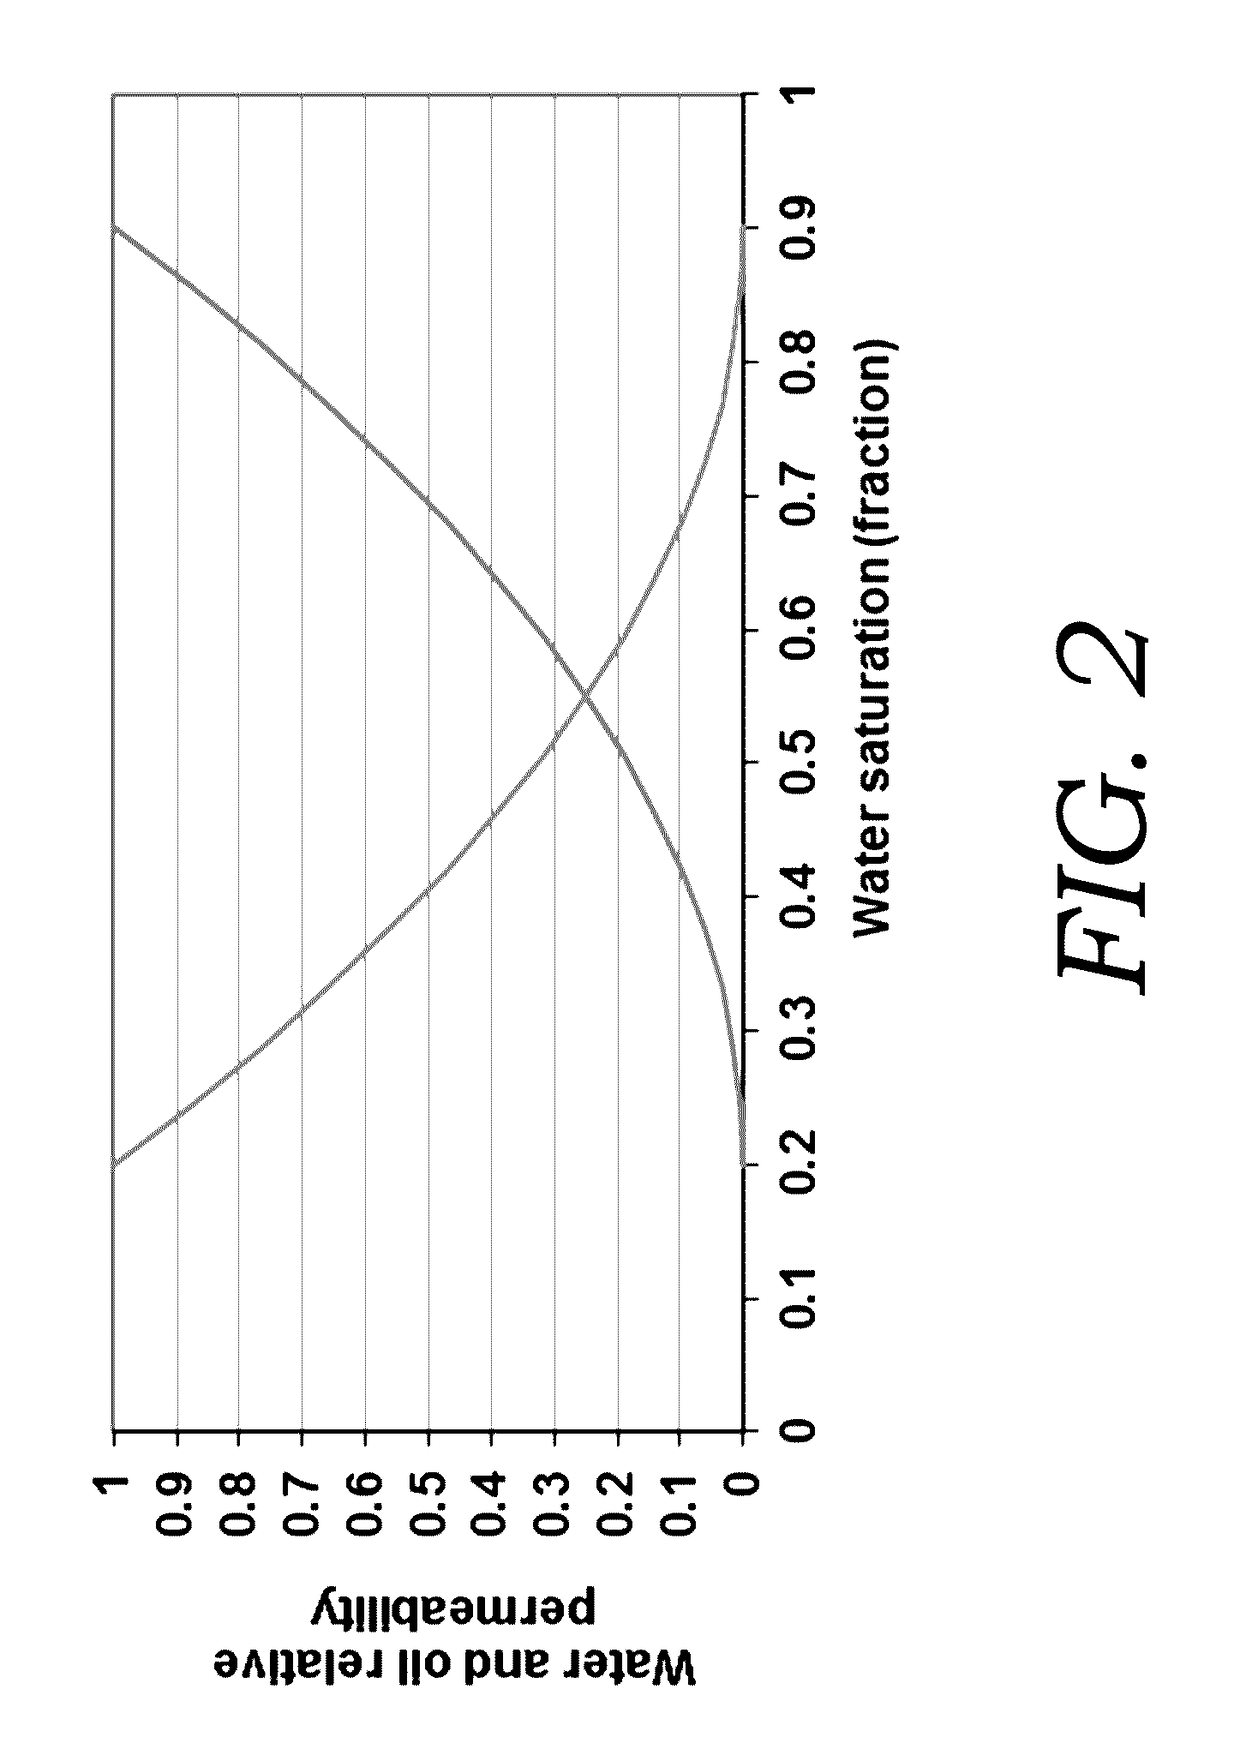 Method for optimization of huff-n-puff gas injection in shale reservoirs